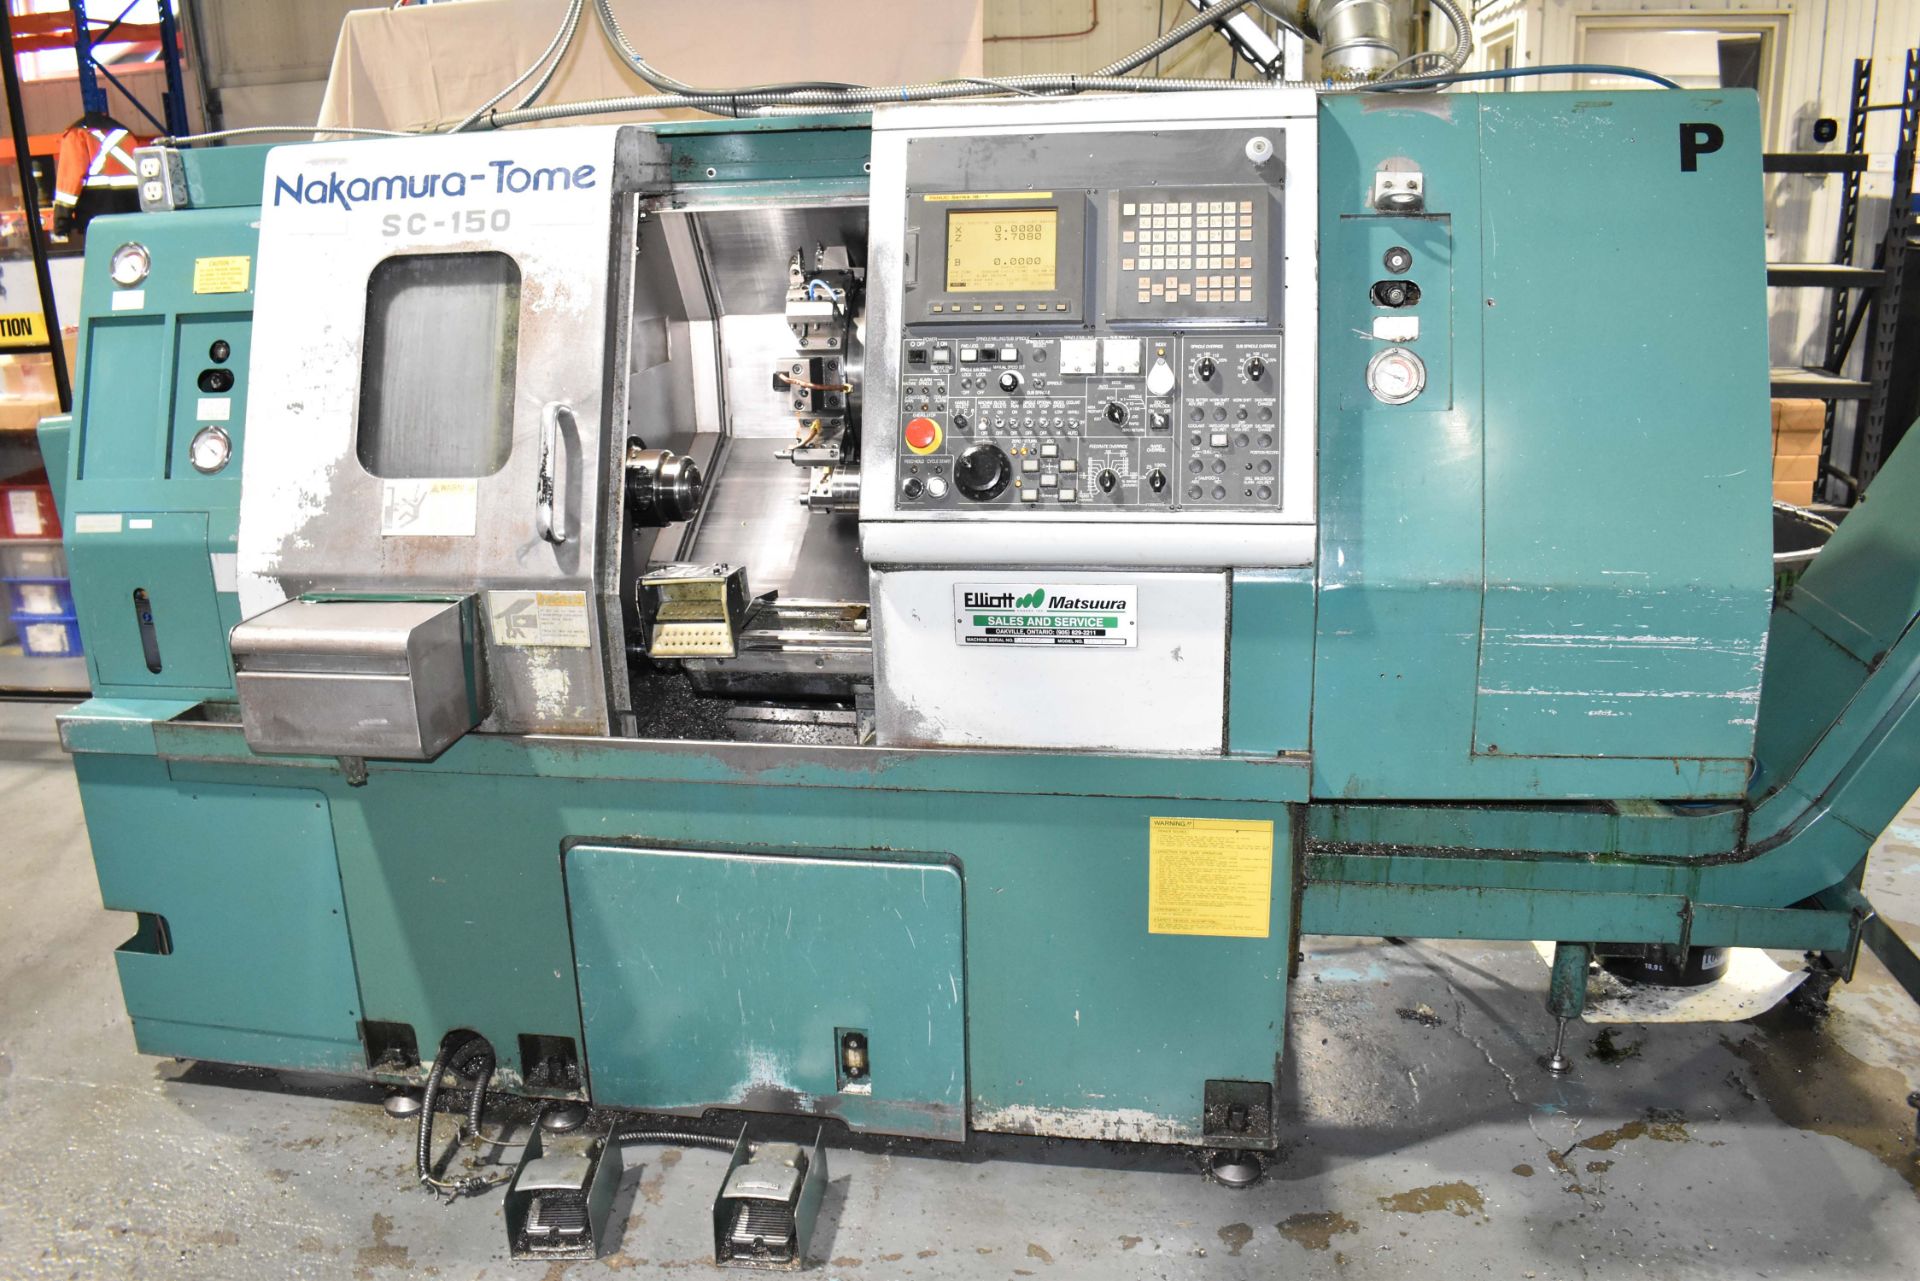 NAKAMURA-TOME SC-150 OPPOSED-SPINDLE CNC TURNING AND LIVE MILLING CENTER WITH FANUC SERIES 18I-T CNC